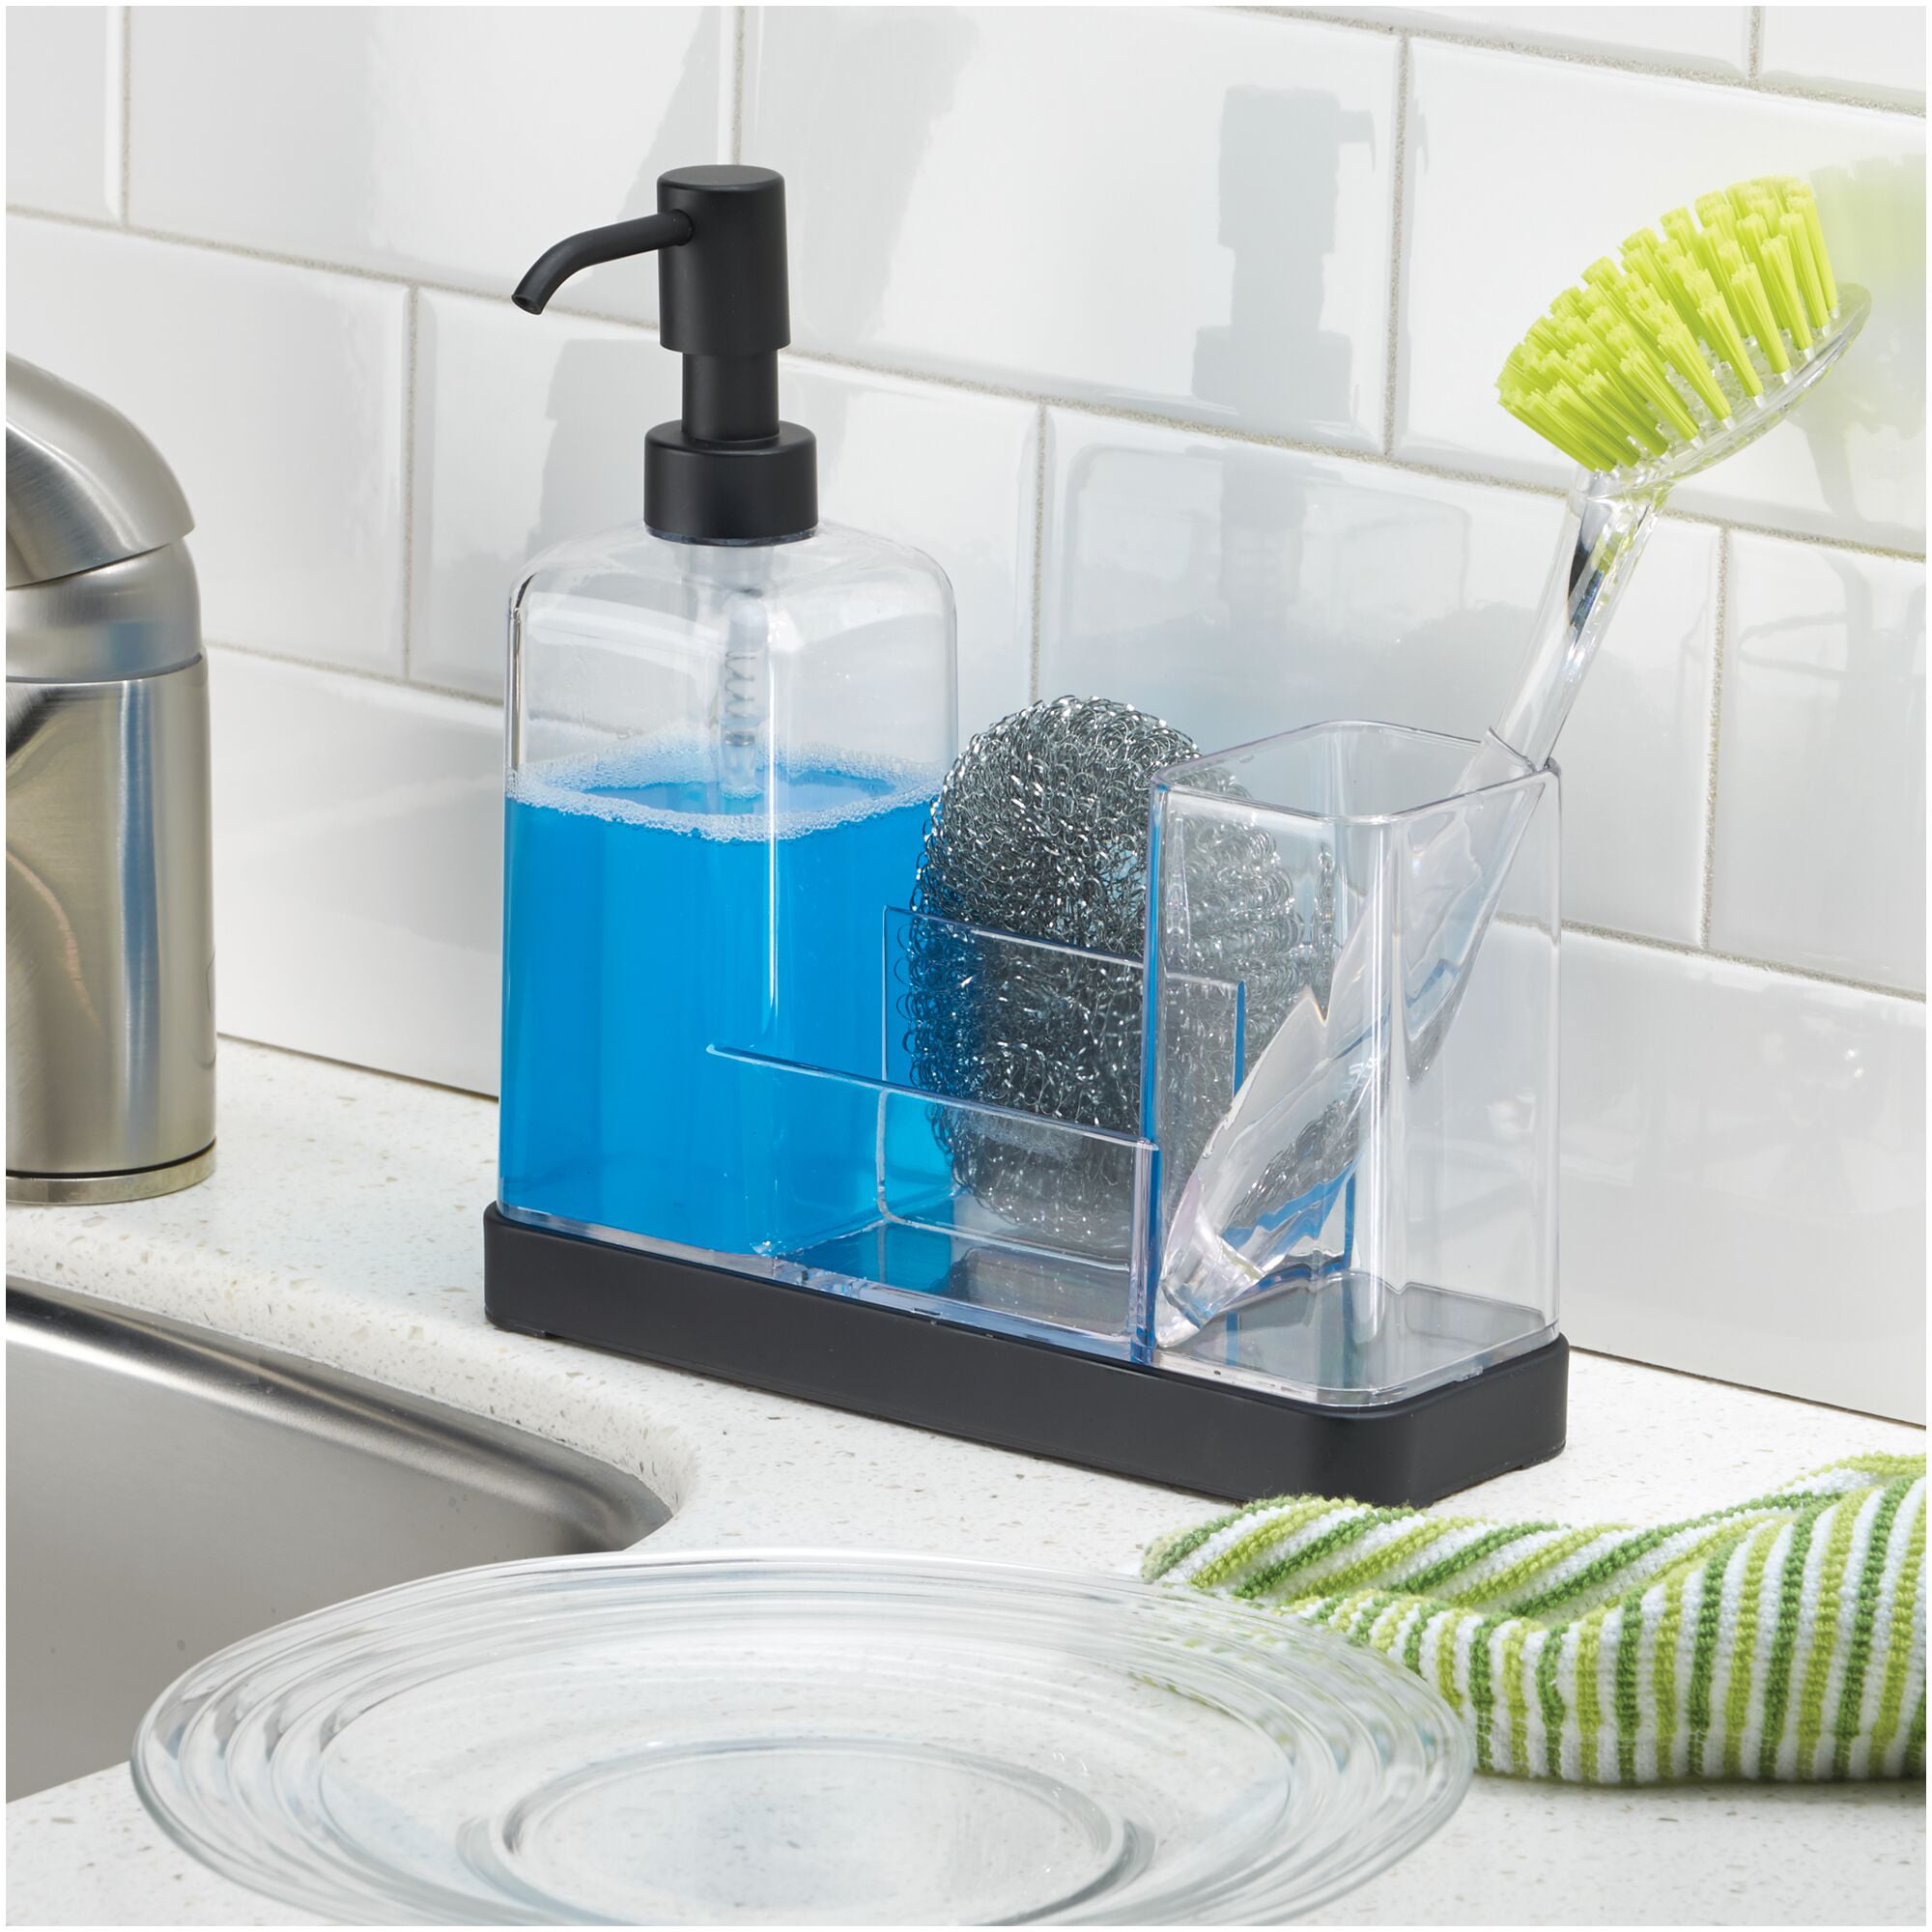 mDesign Modern Plastic Kitchen Sink Countertop Liquid Dish Soap Dispenser  Pump Bottle Caddy with Storage Compartments - Holds and Stores Sponges, 